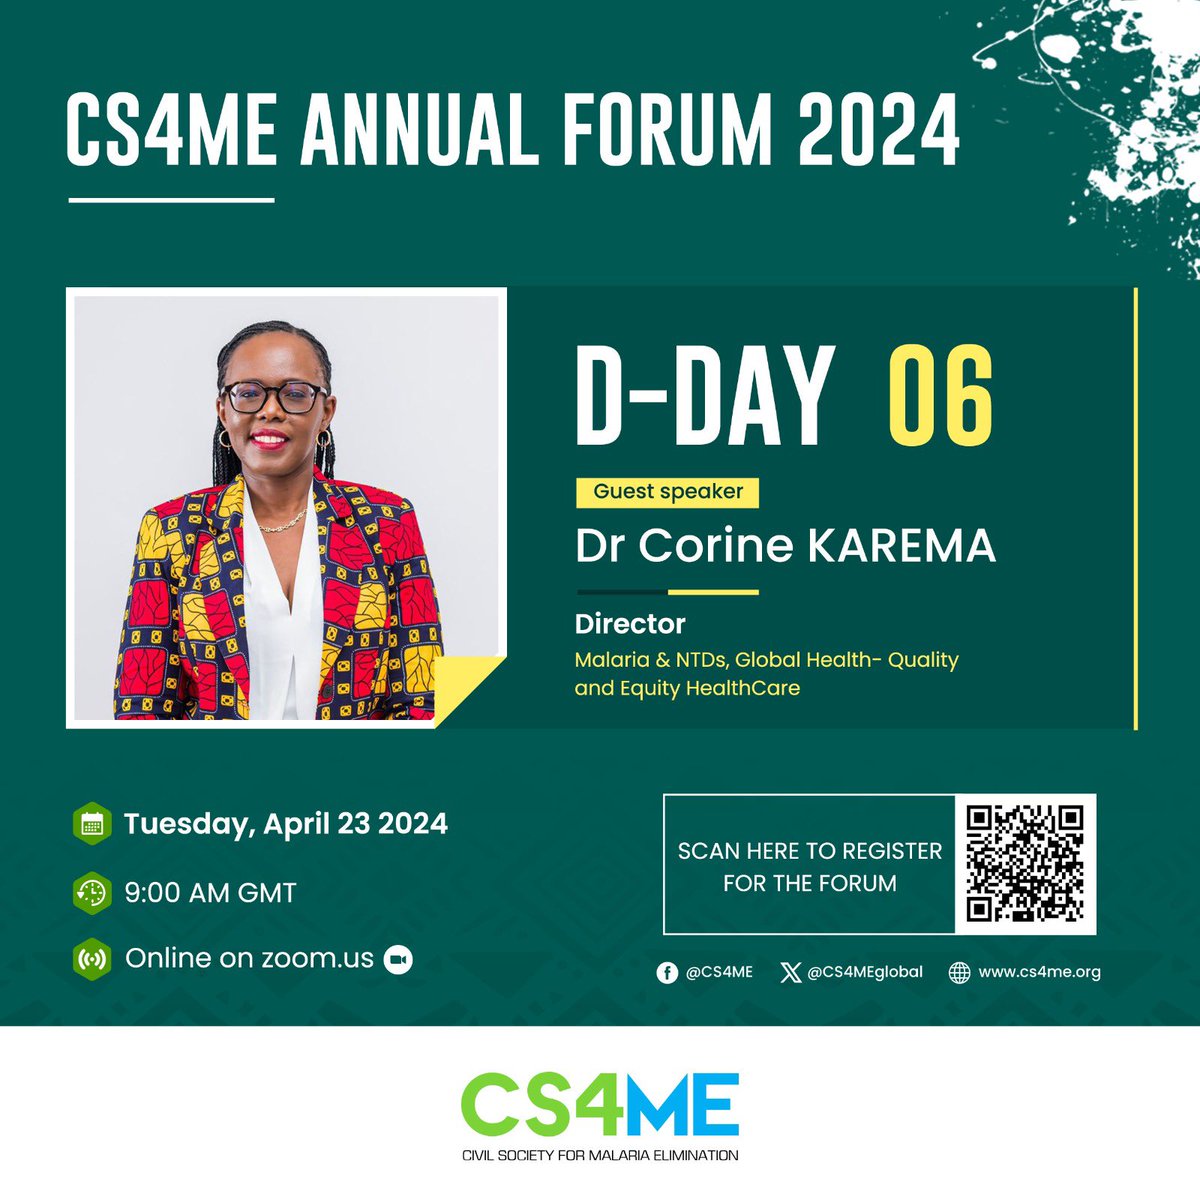 📢 The CS4ME Annual Forum is just 6 days away! It will bring nearly 500 civil society organizations and key partners in the fight against malaria! Together, we'll address critical issues of equity, gender equality, and human rights to accelerate progress towards malaria…